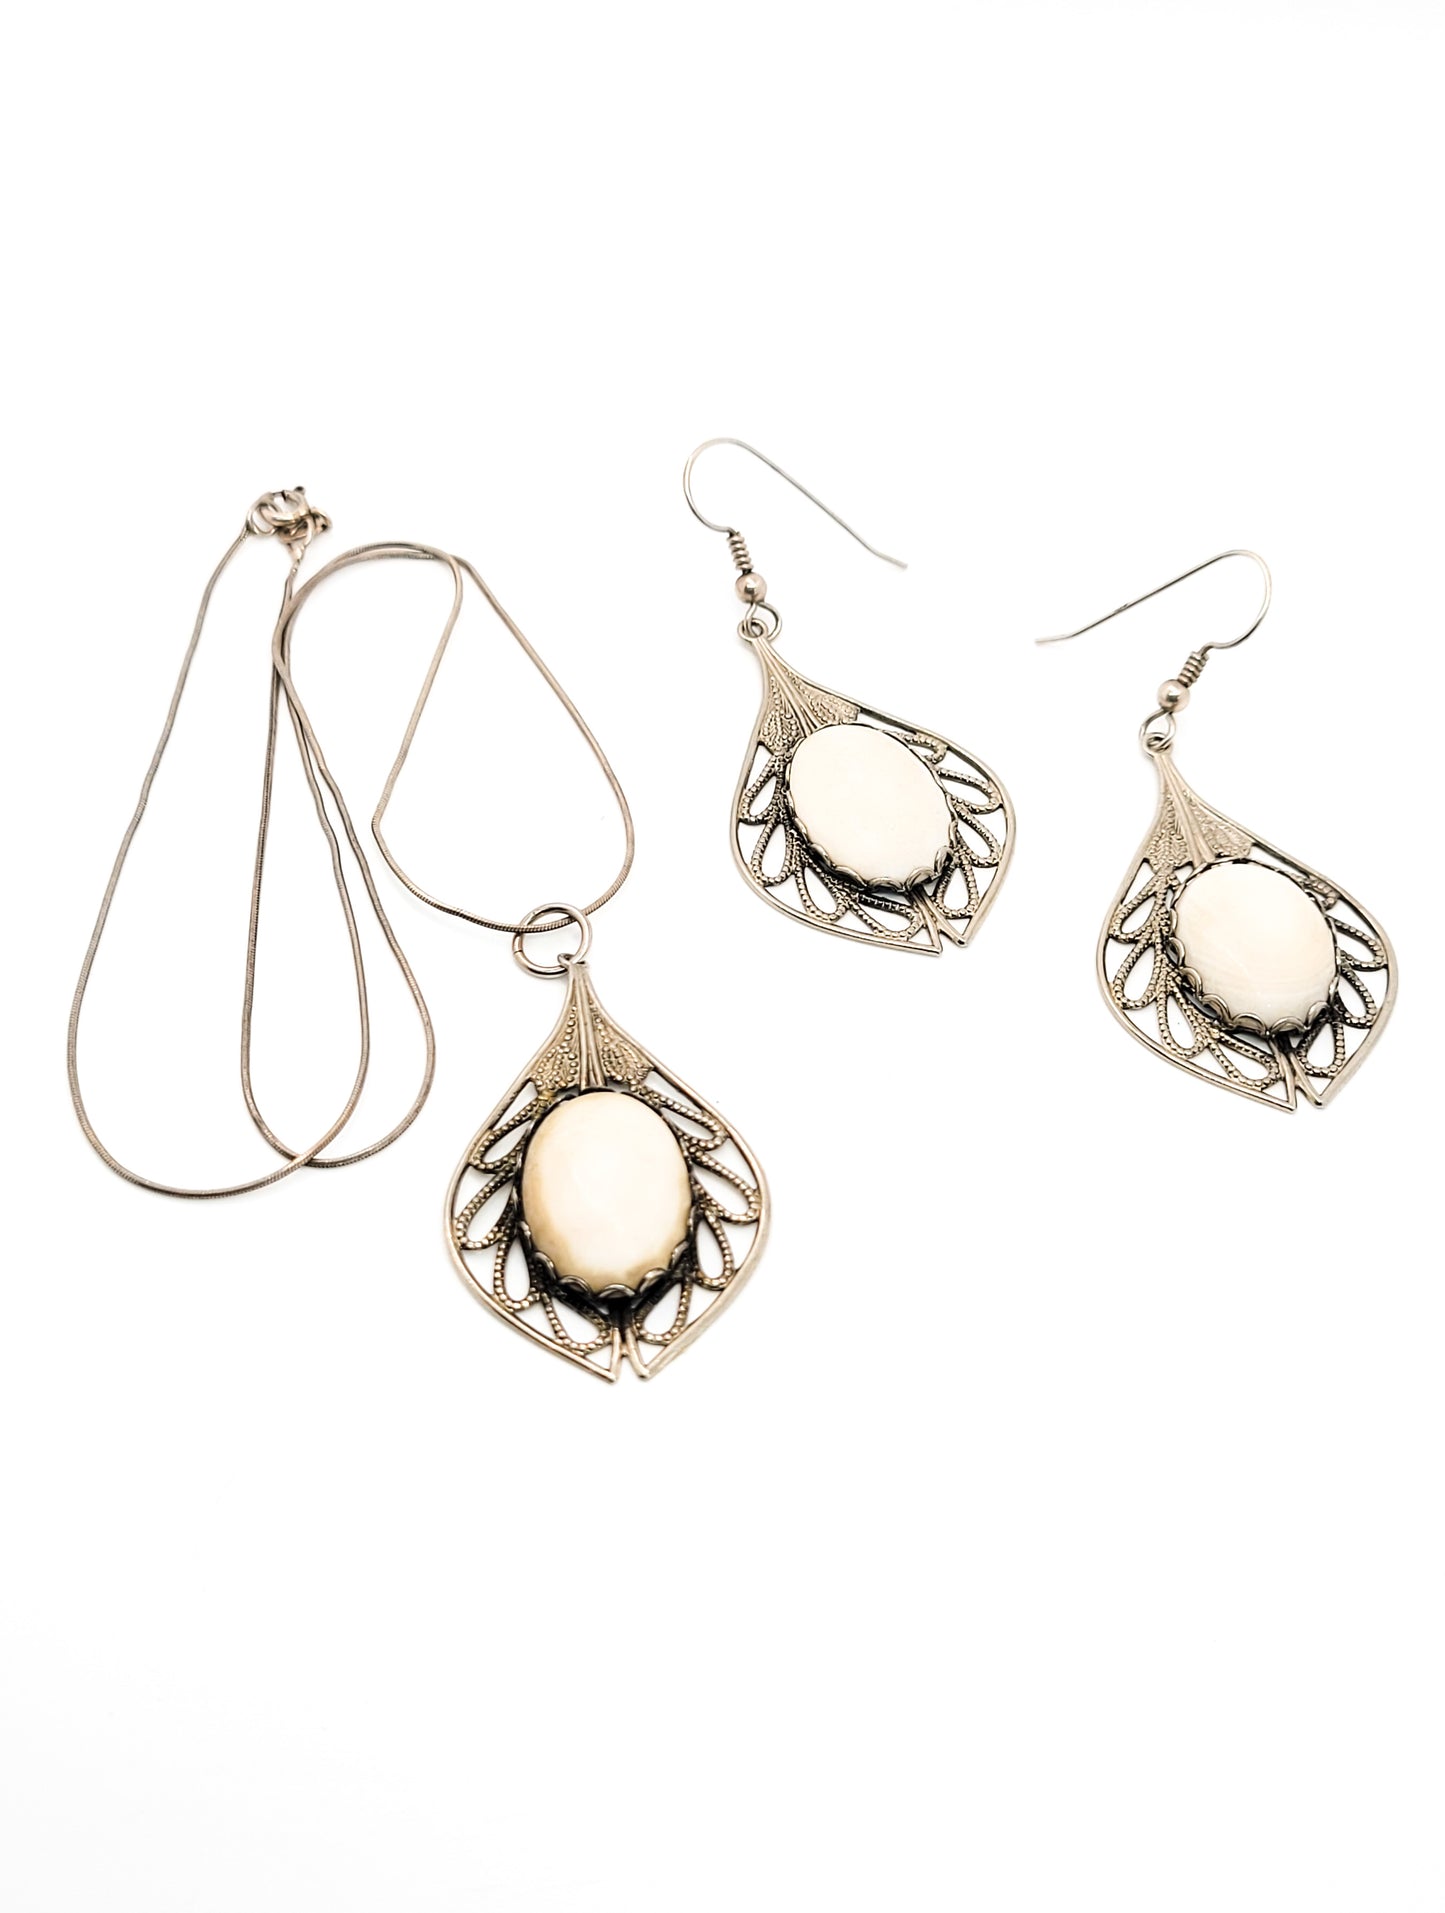 Filigree stamped sterling silver and white shell MOP vintage necklace and earrings set 925